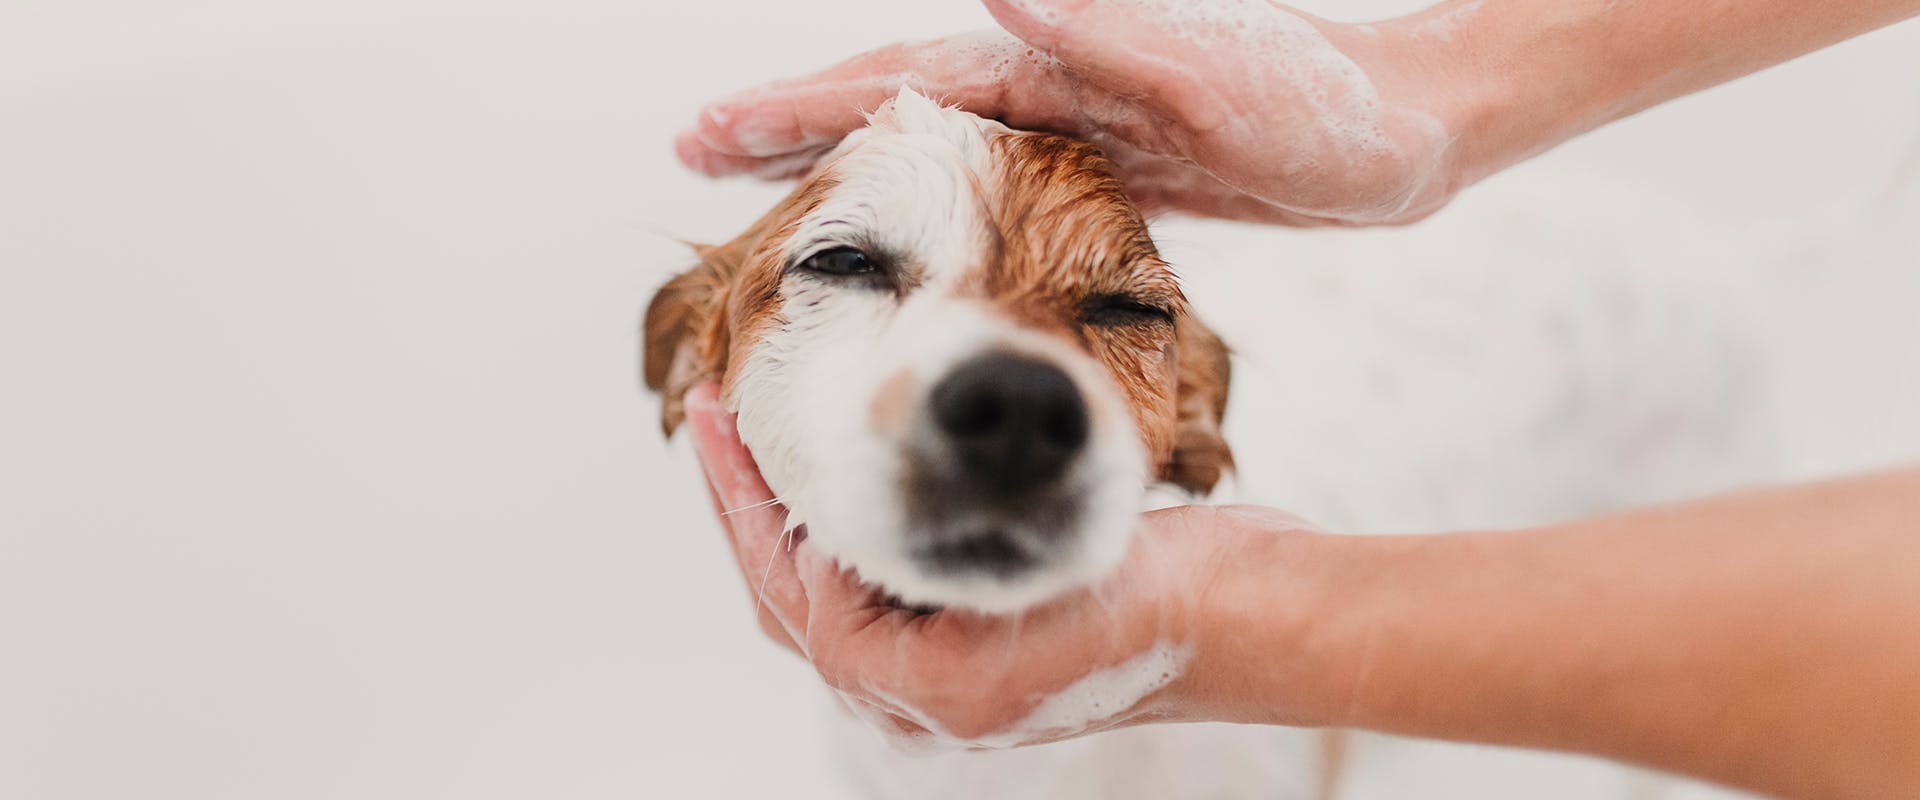 A person carefully shampooing a dog's head